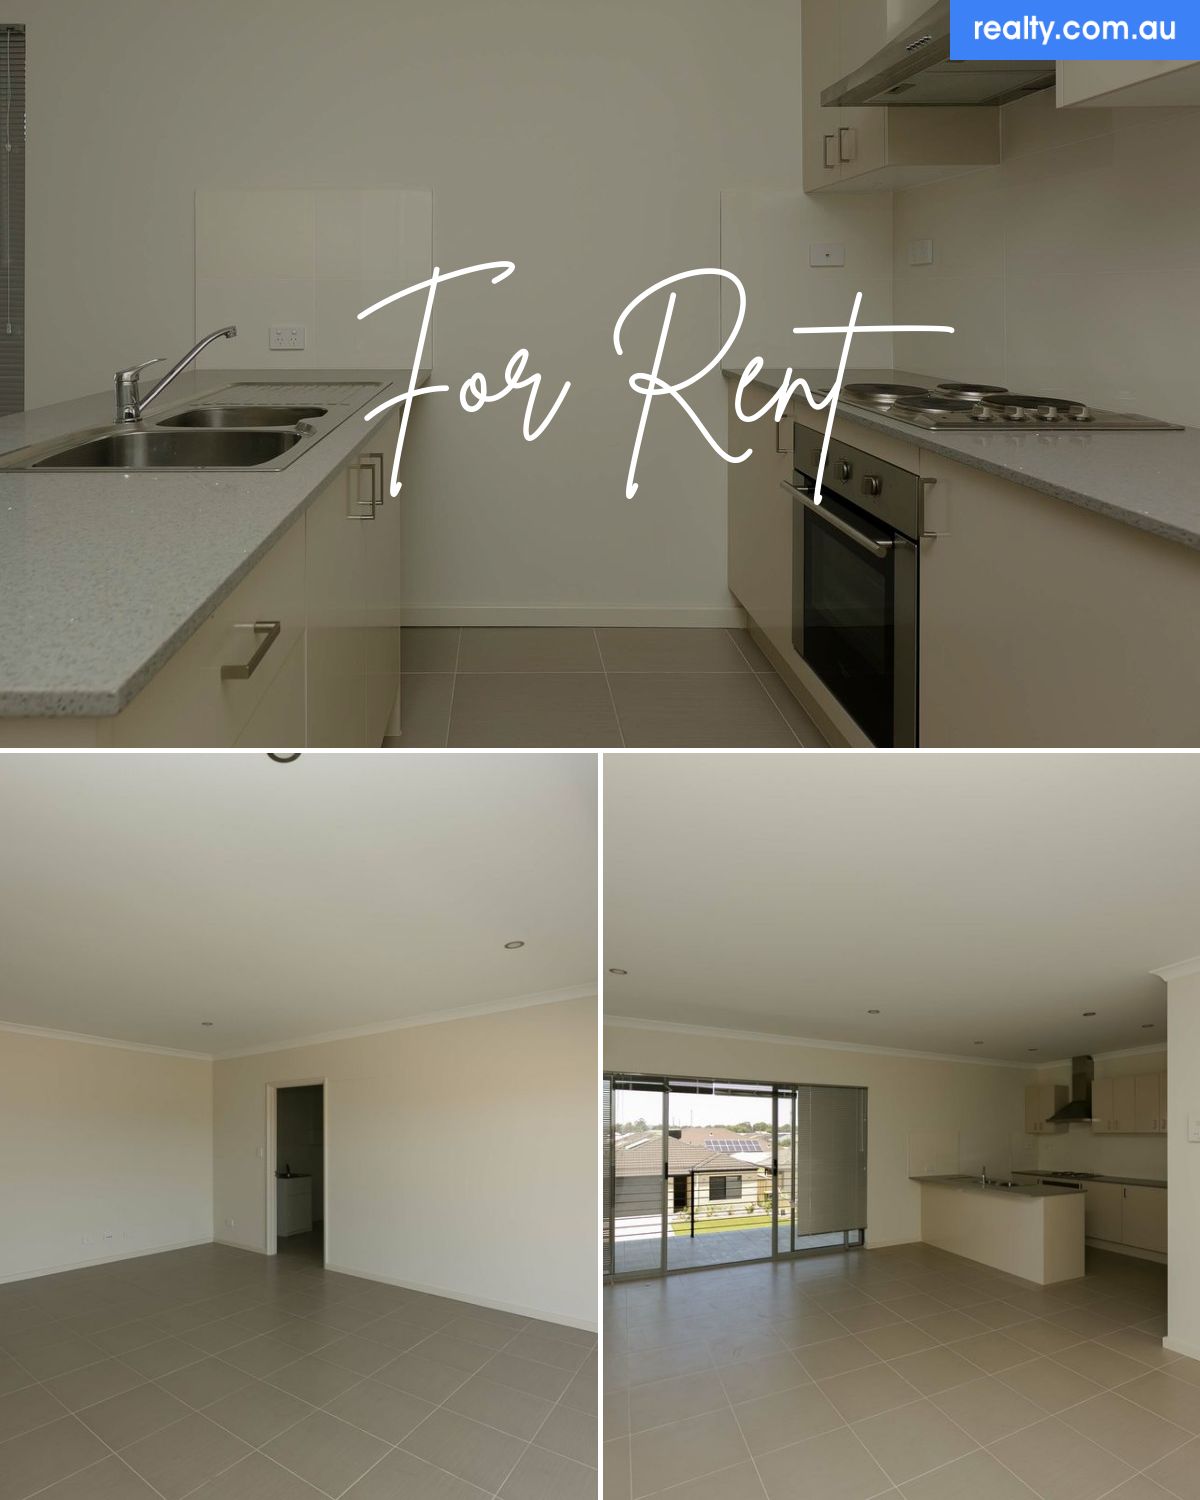 Unit 3/66A Comrie Rd, Canning Vale, WA 6155 | Realty.com.au